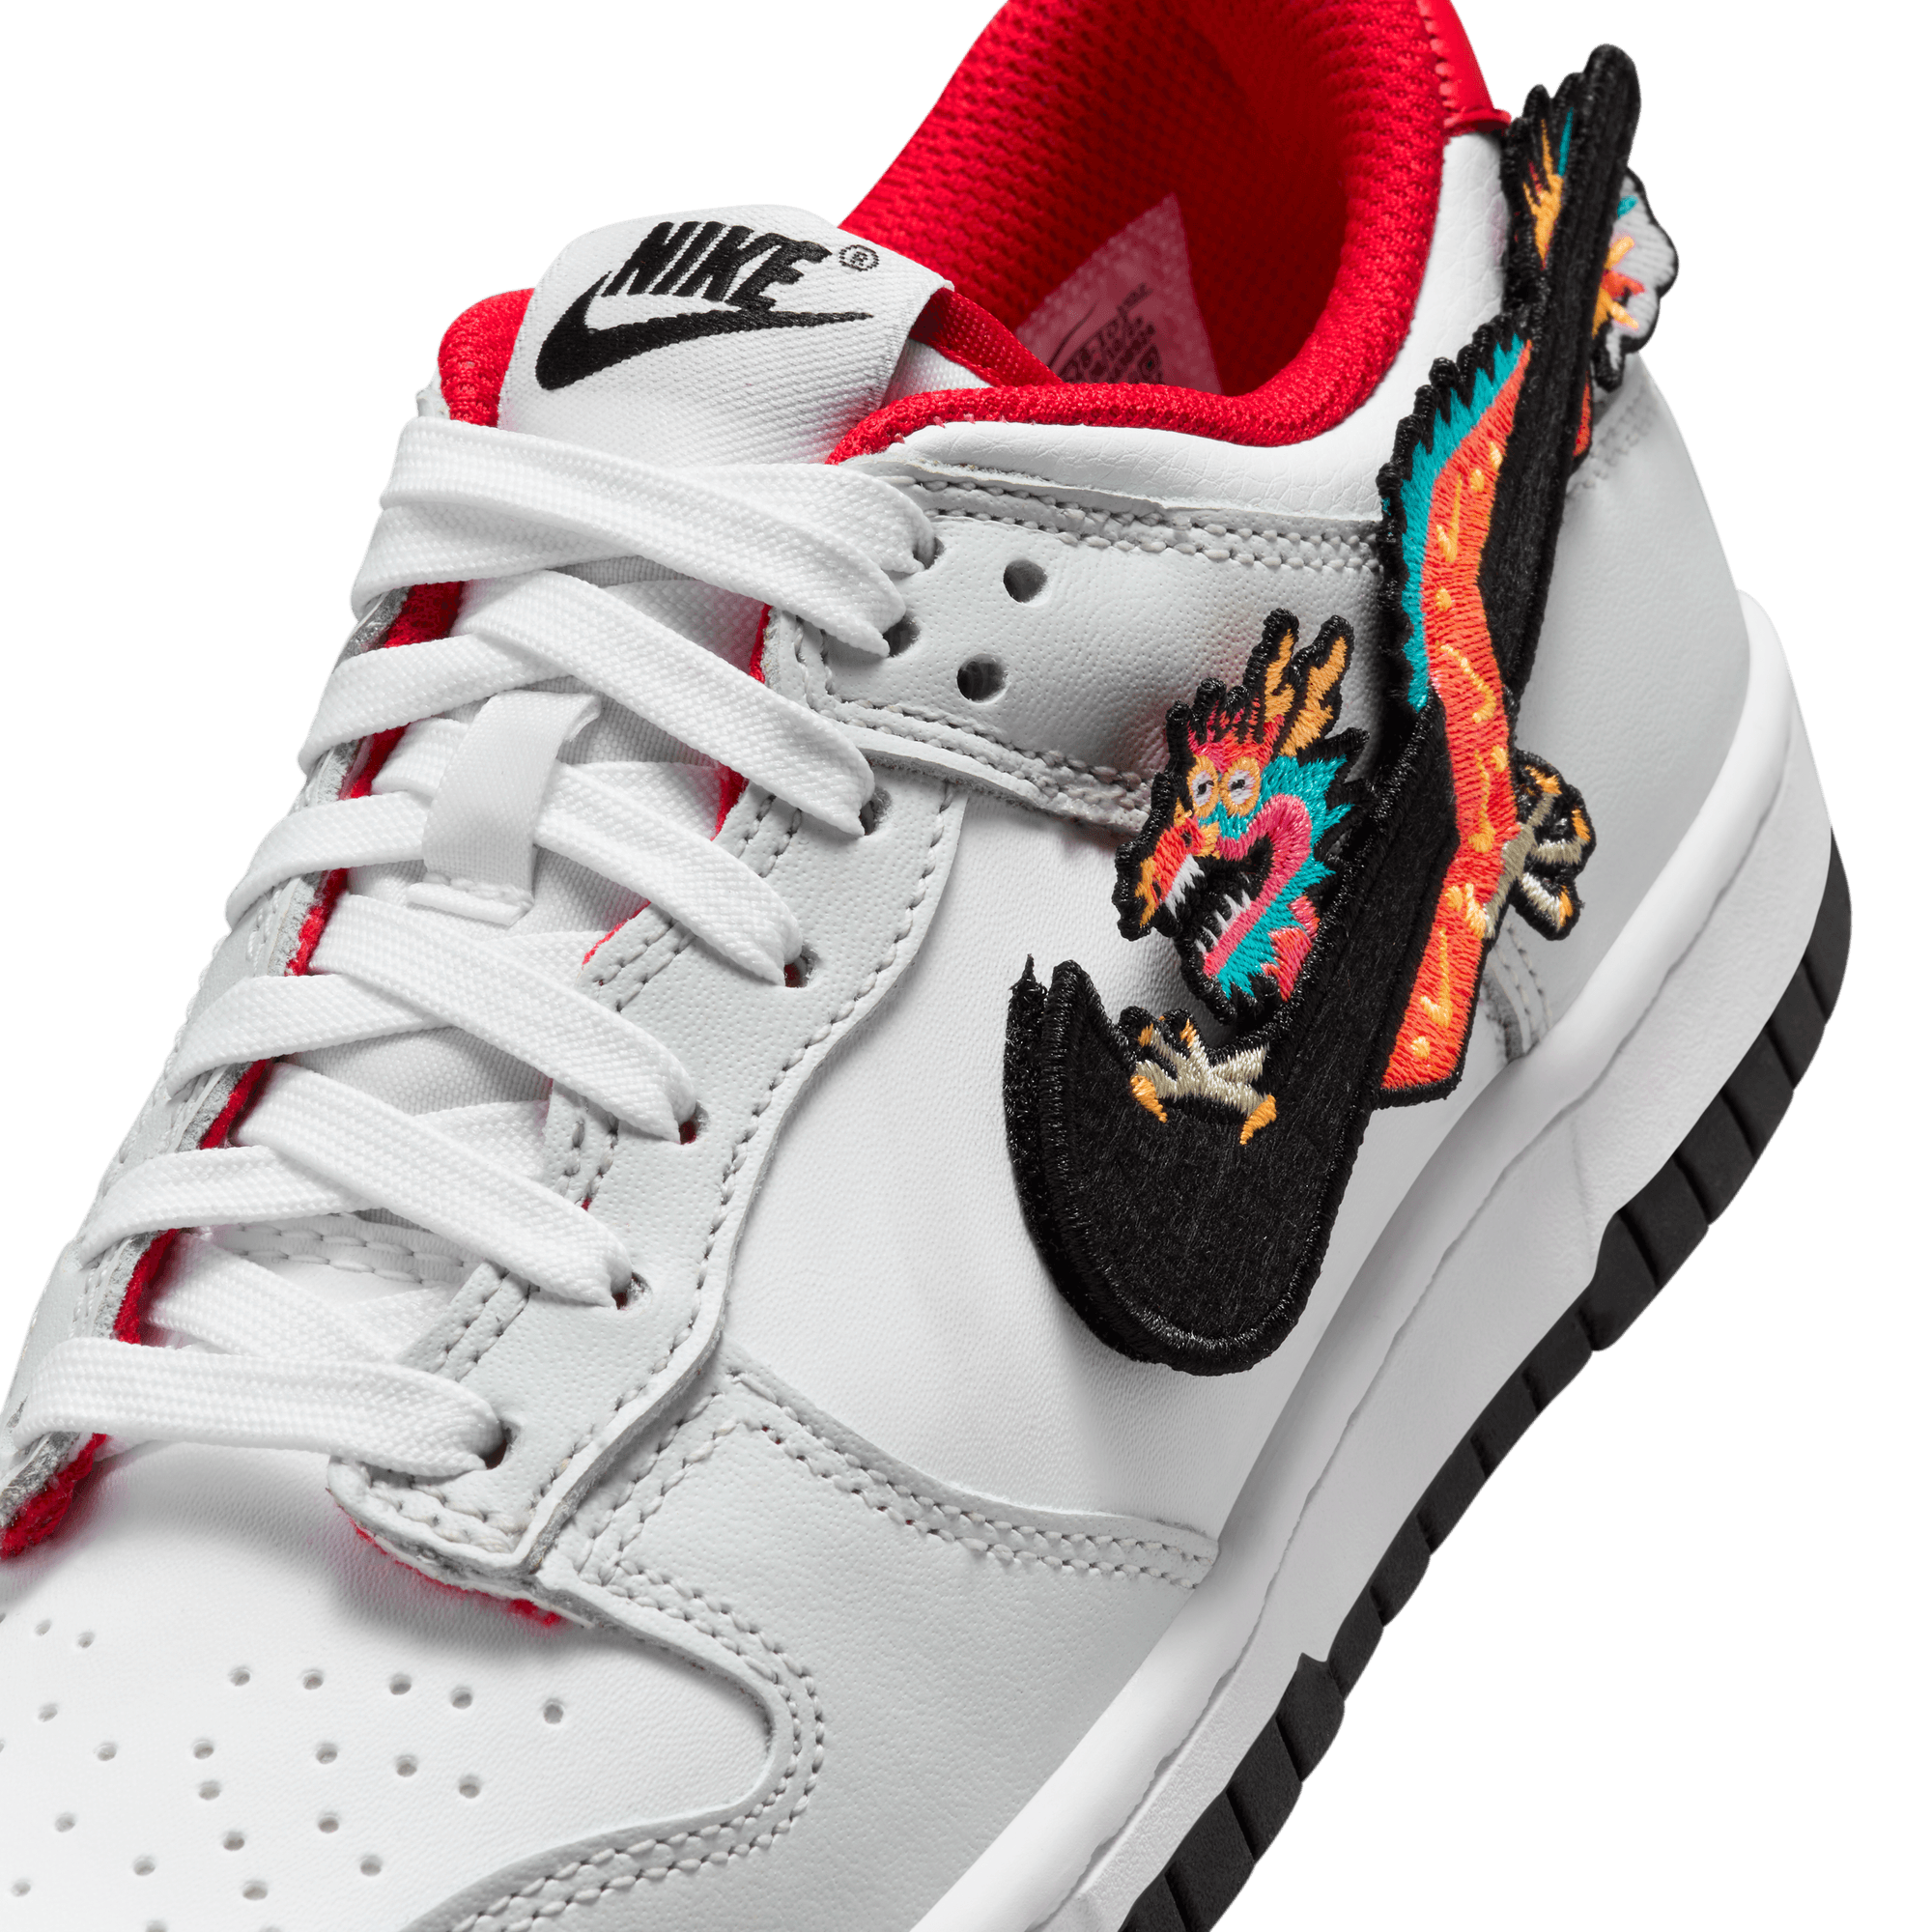 DUNK LOW (GS) "YEAR OF THE DRAGON"